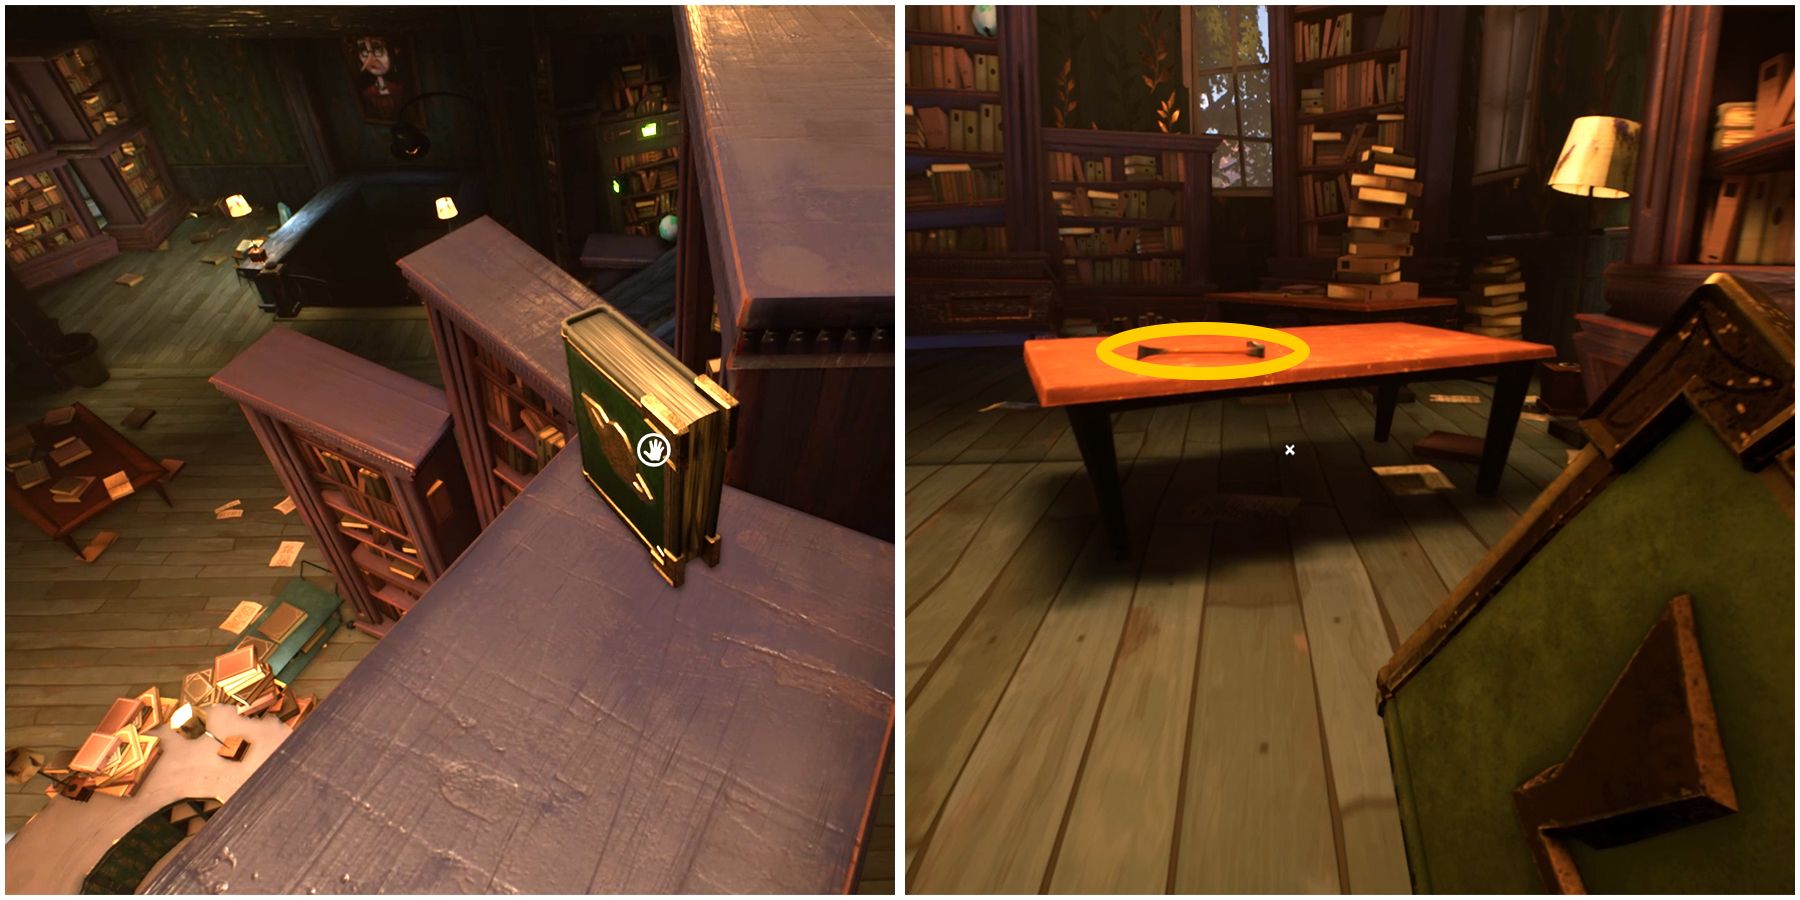 planet book and crowbar location in hello neighbor 2 late fees dlc